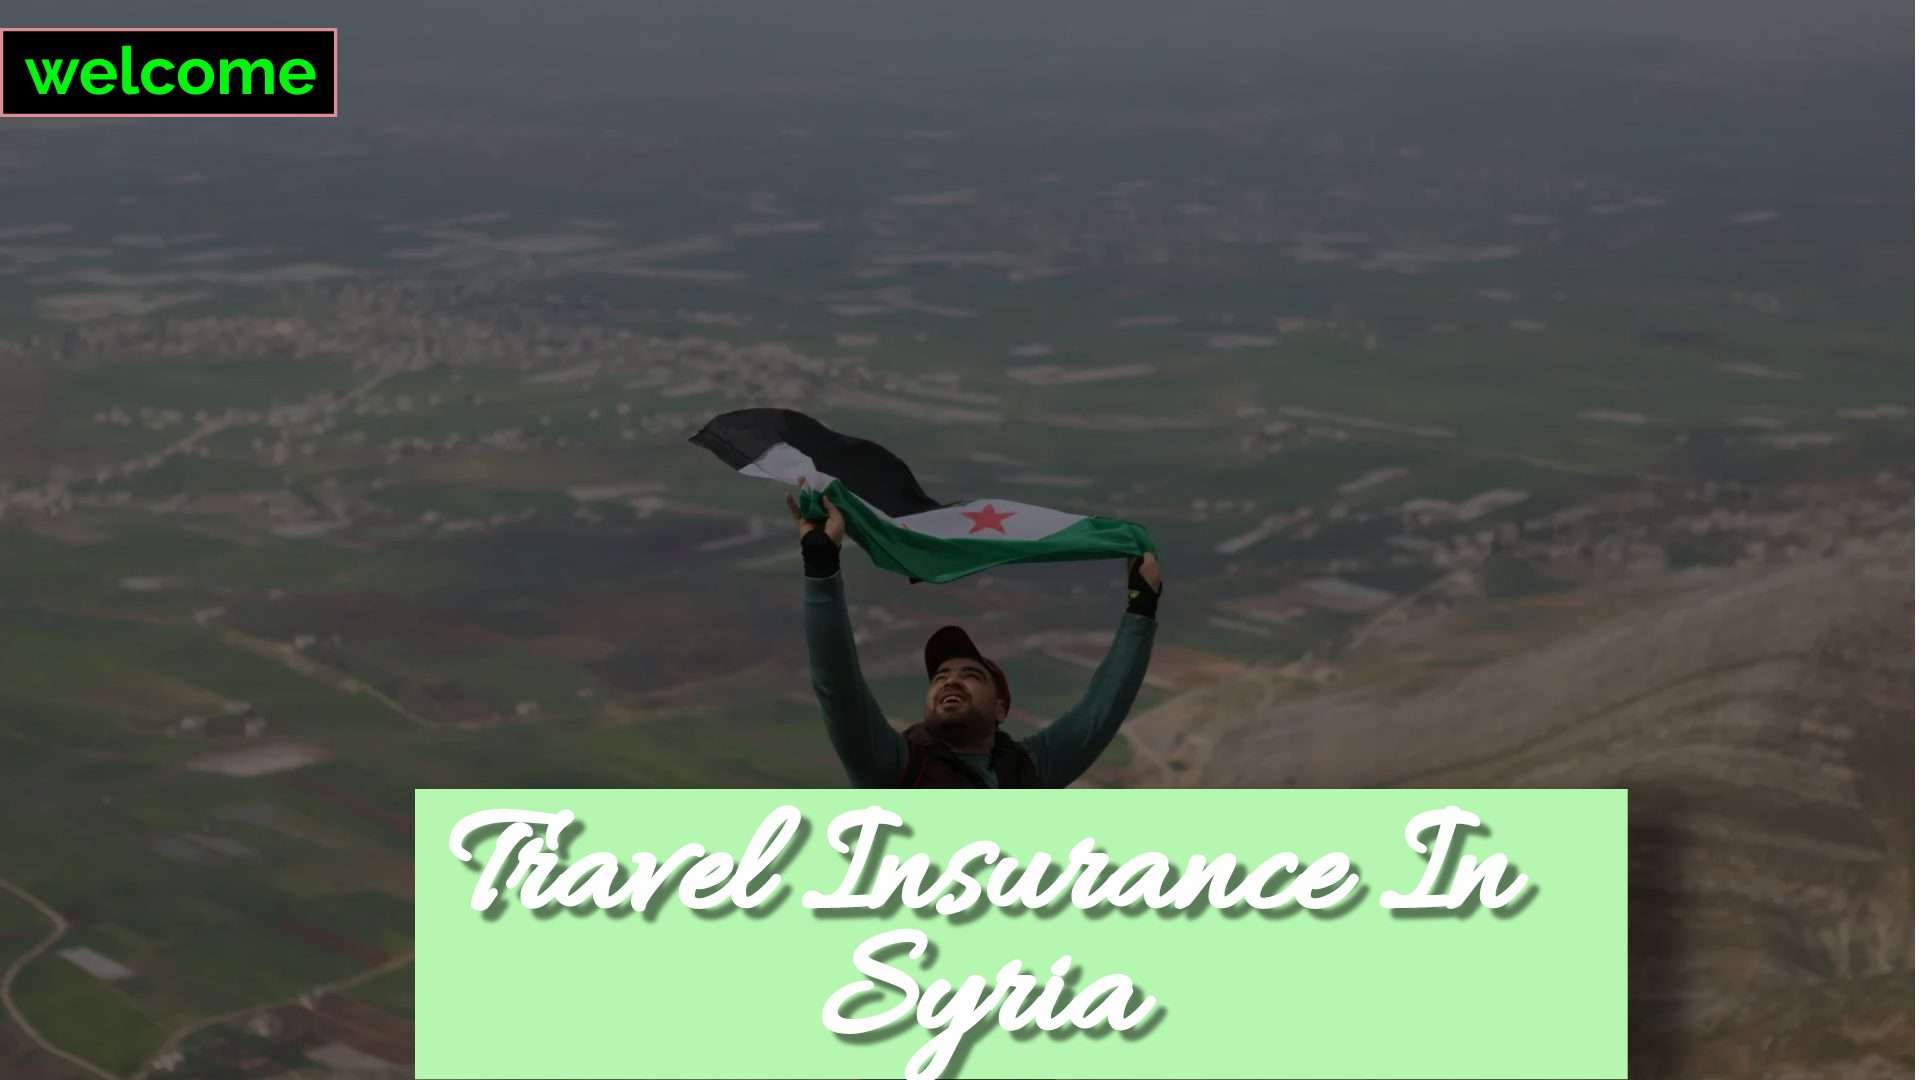 Travel Insurance in Syria